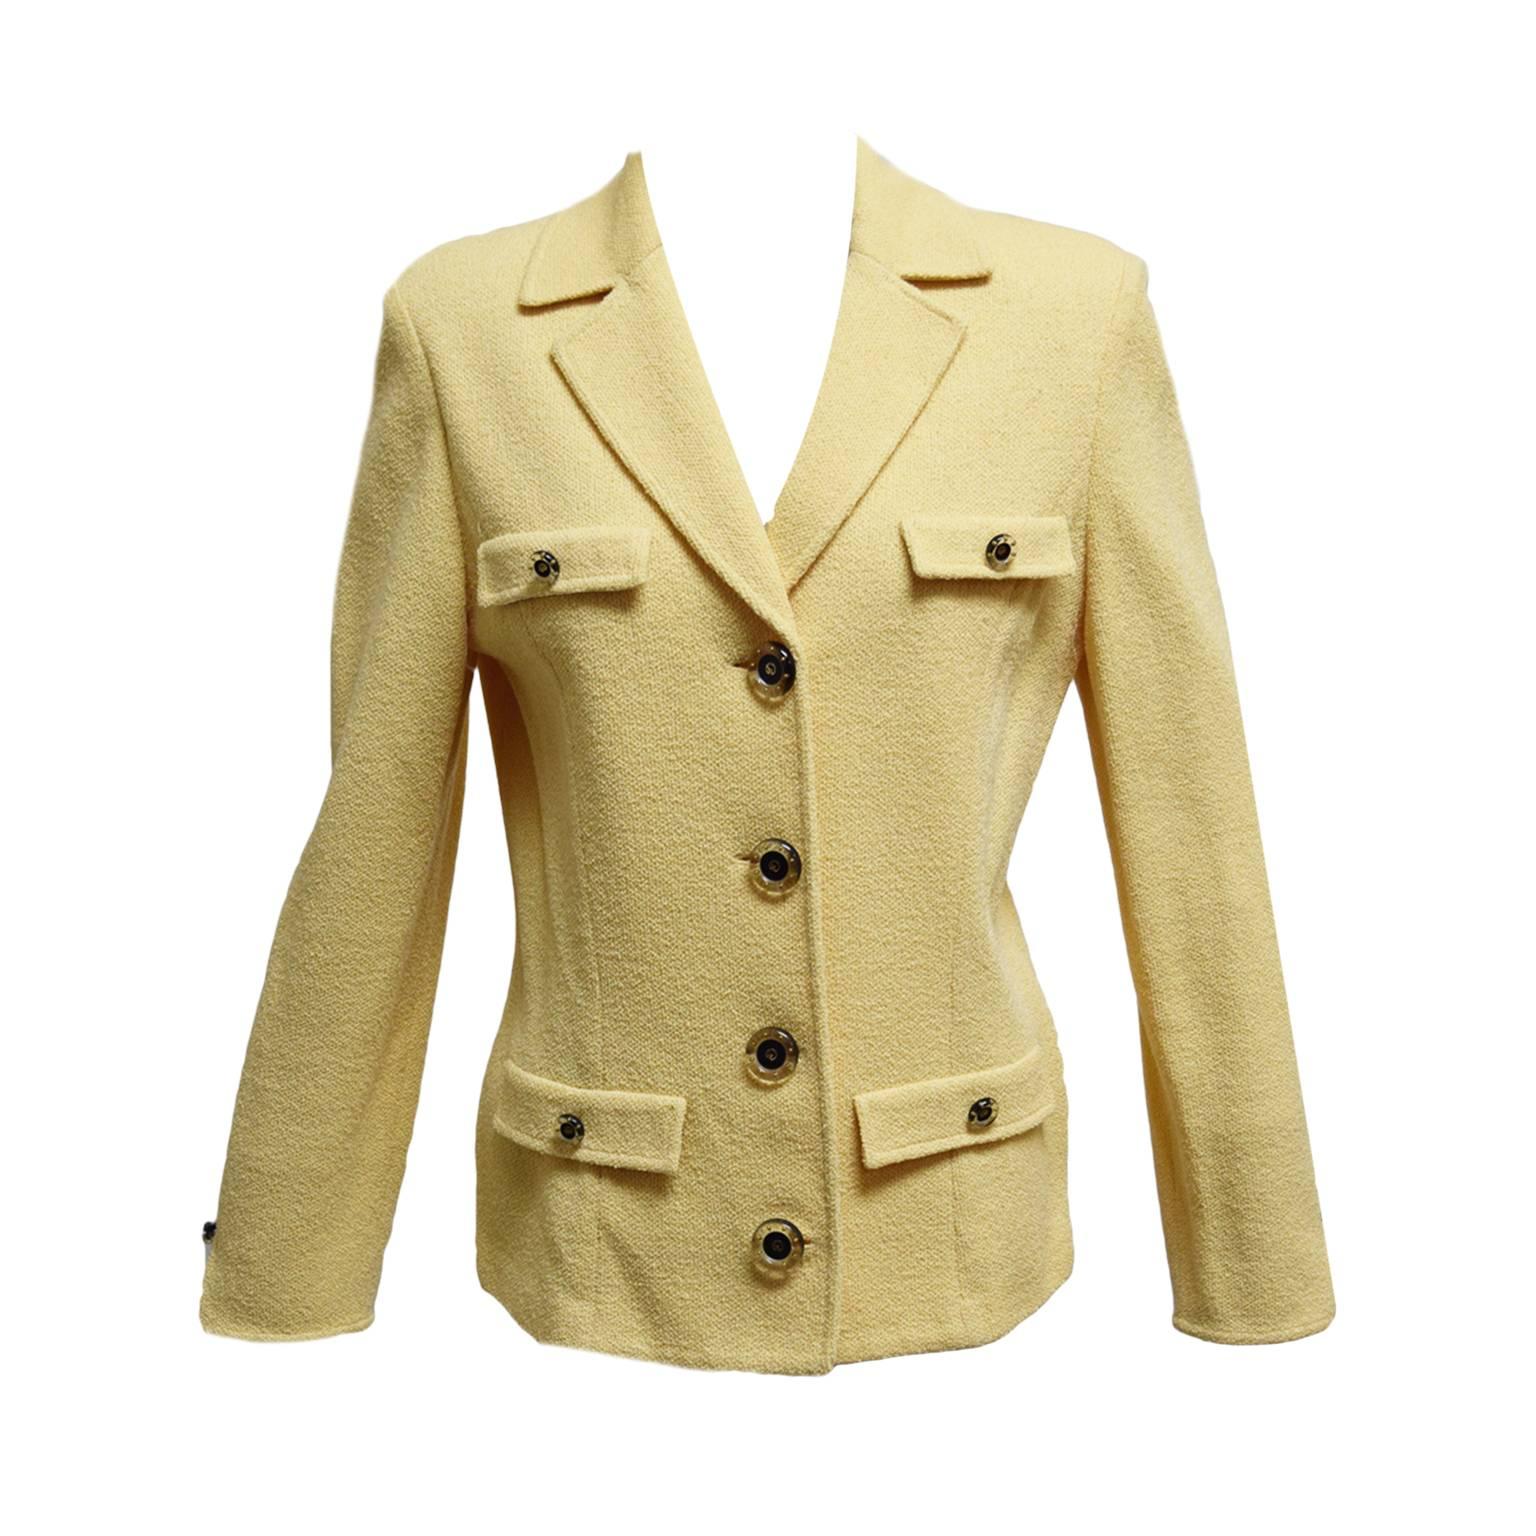 St. John Butter Yellow Knit Jacket For Sale